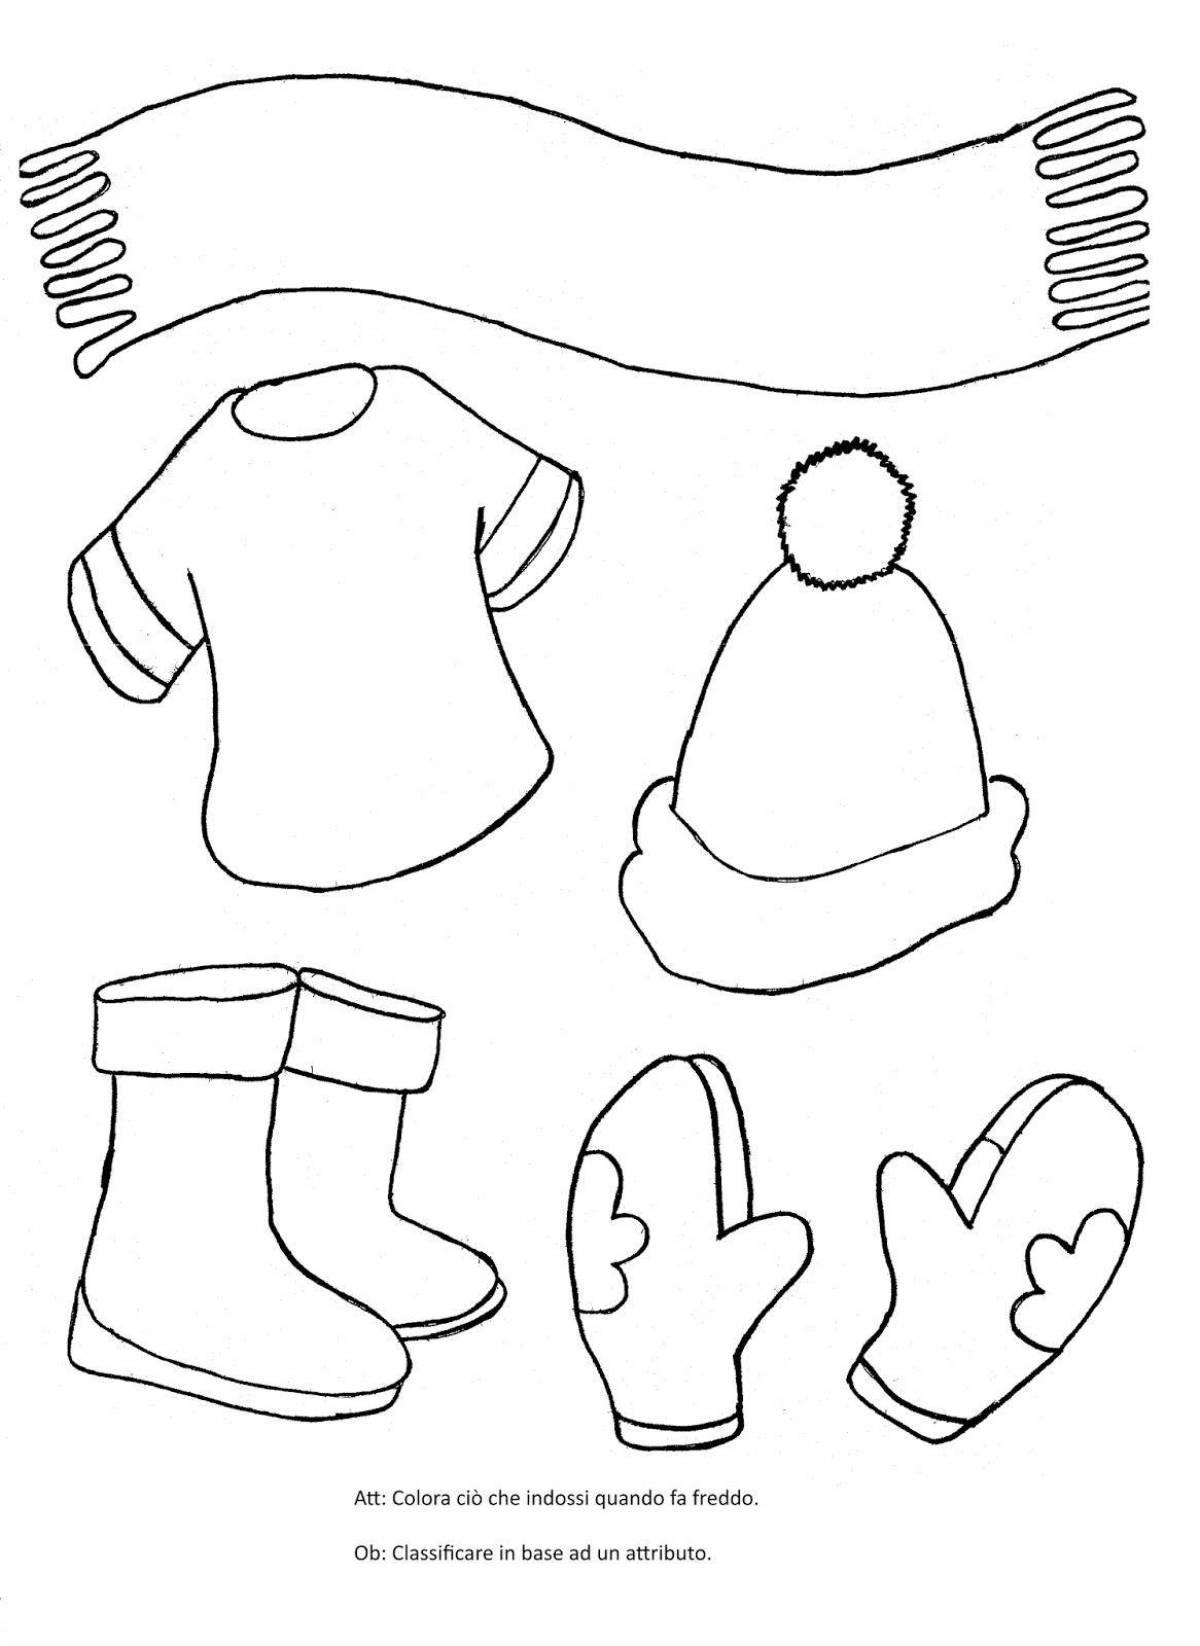 Colourful mittens and hat coloring book for kids